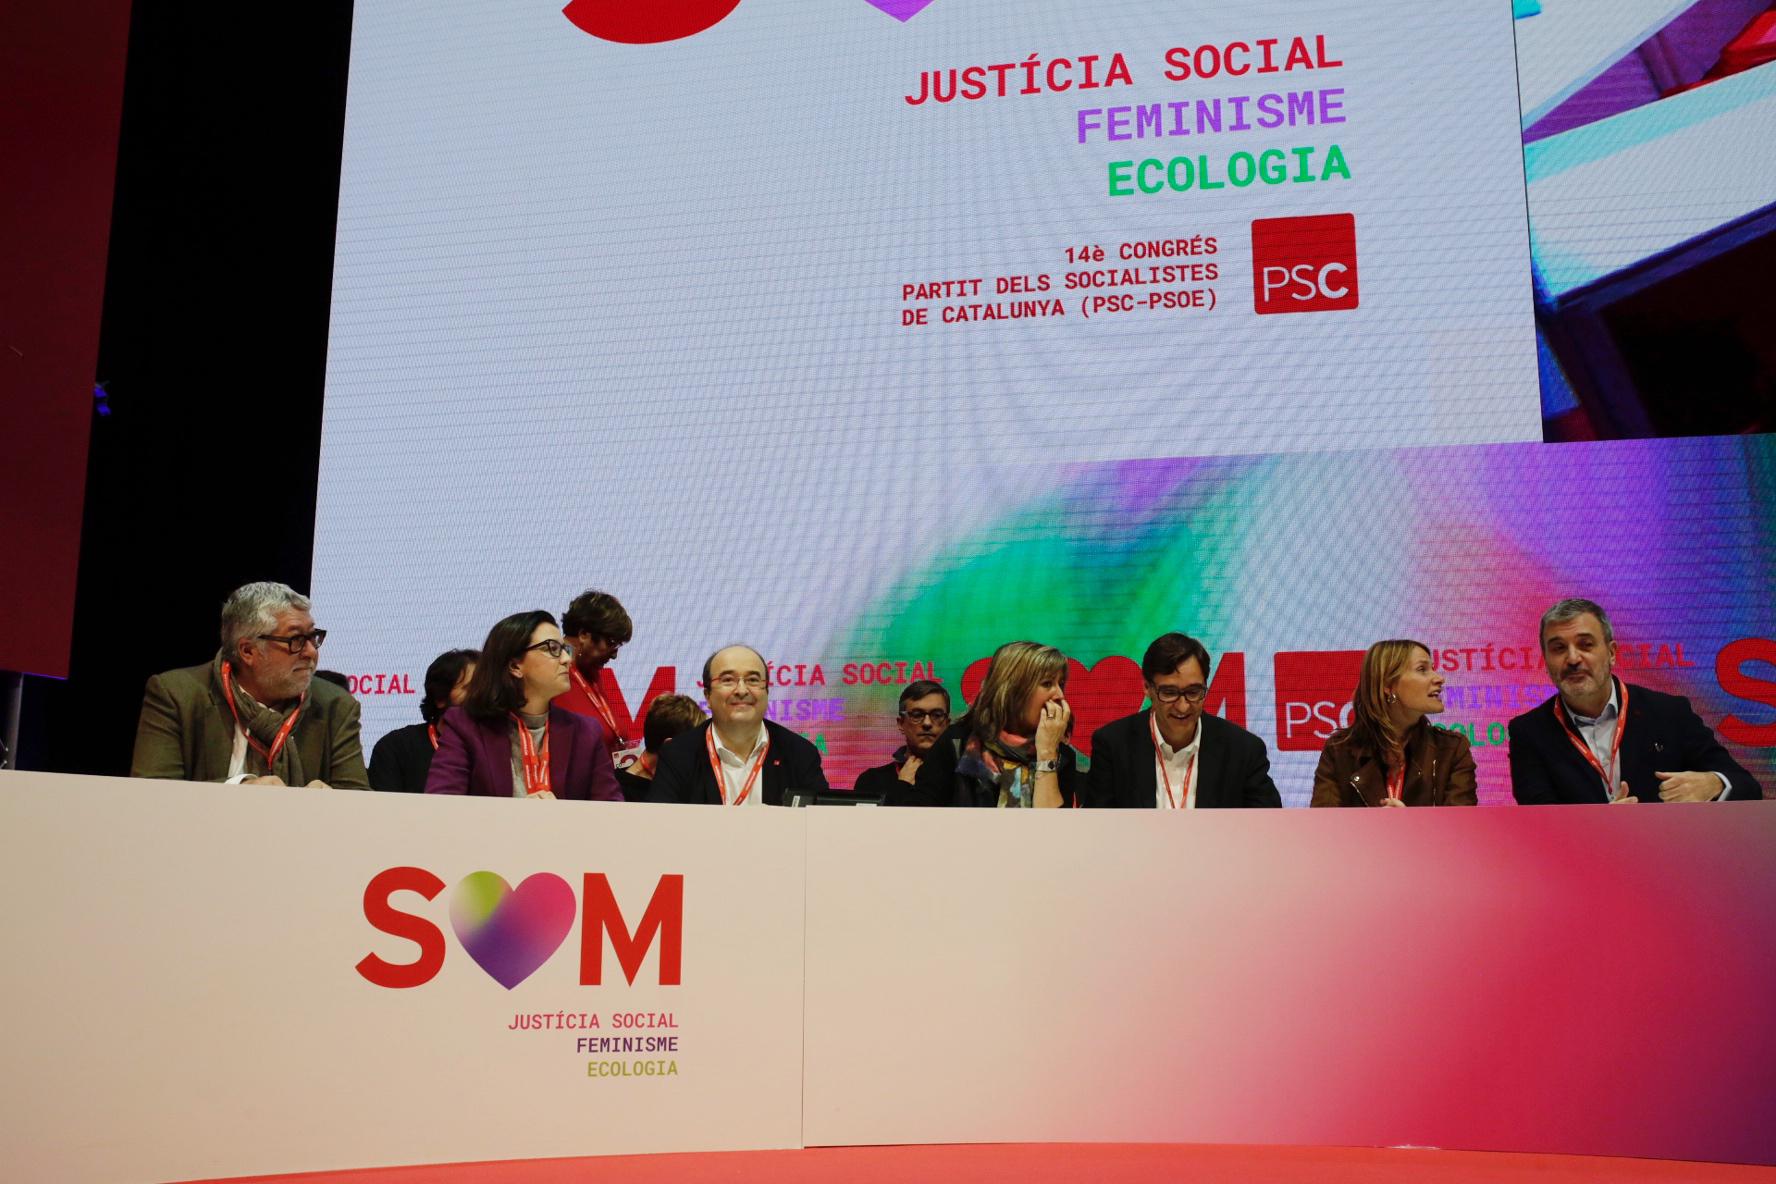 PSC conference softens language proposal, retaining Catalan immersion